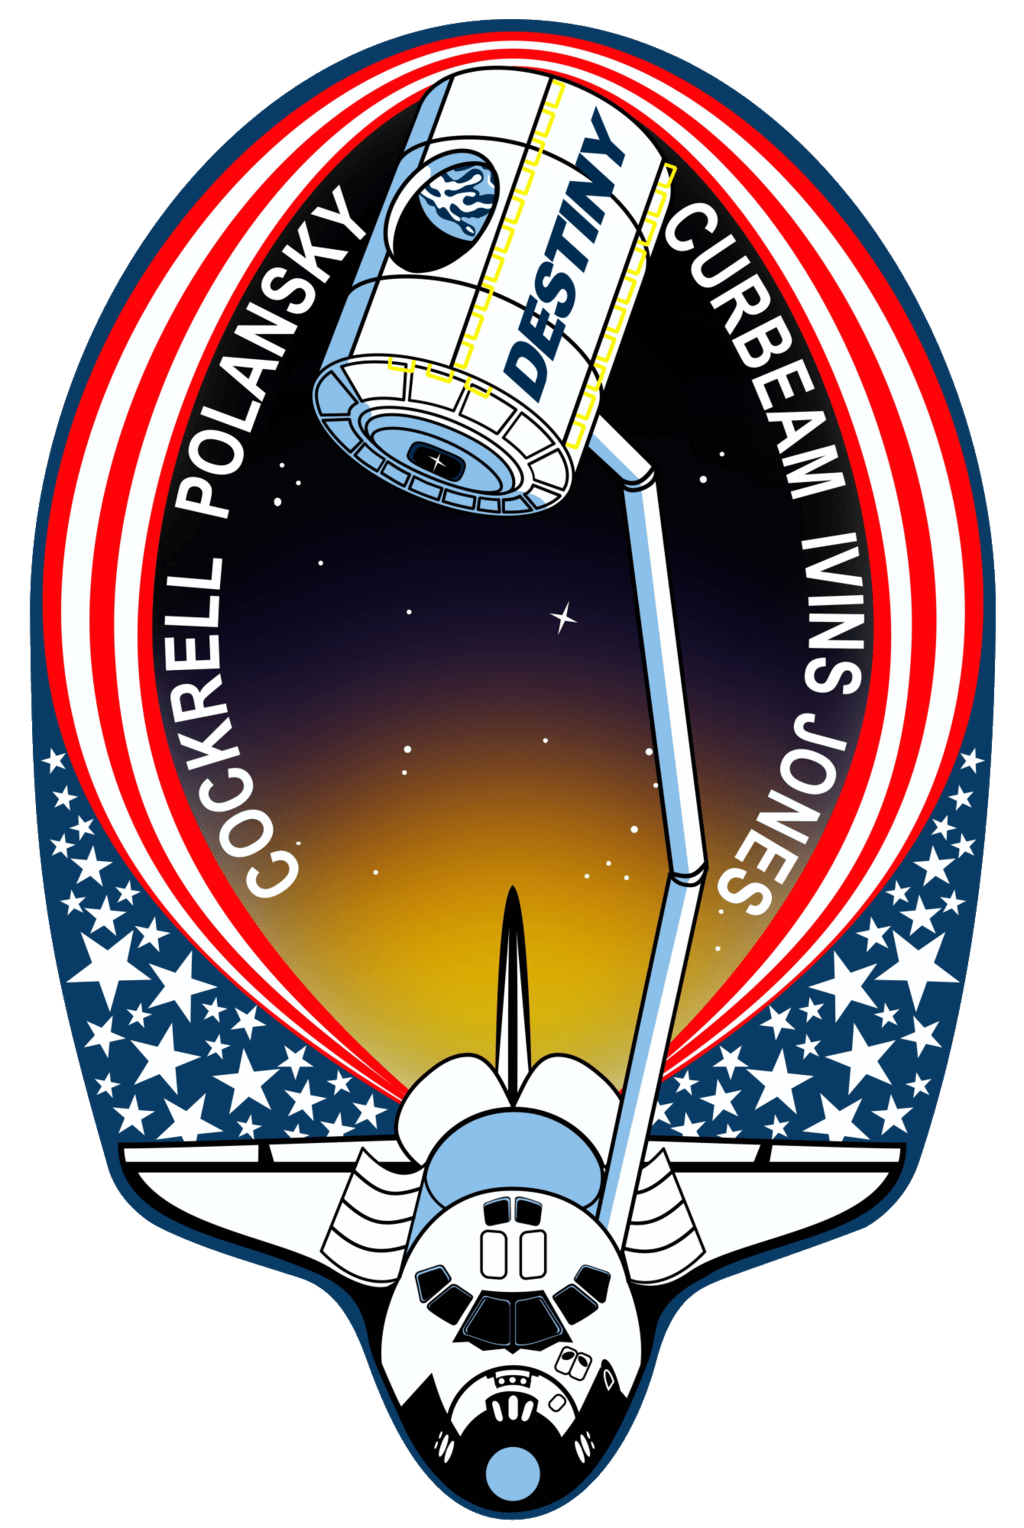 Mission patch for STS-98